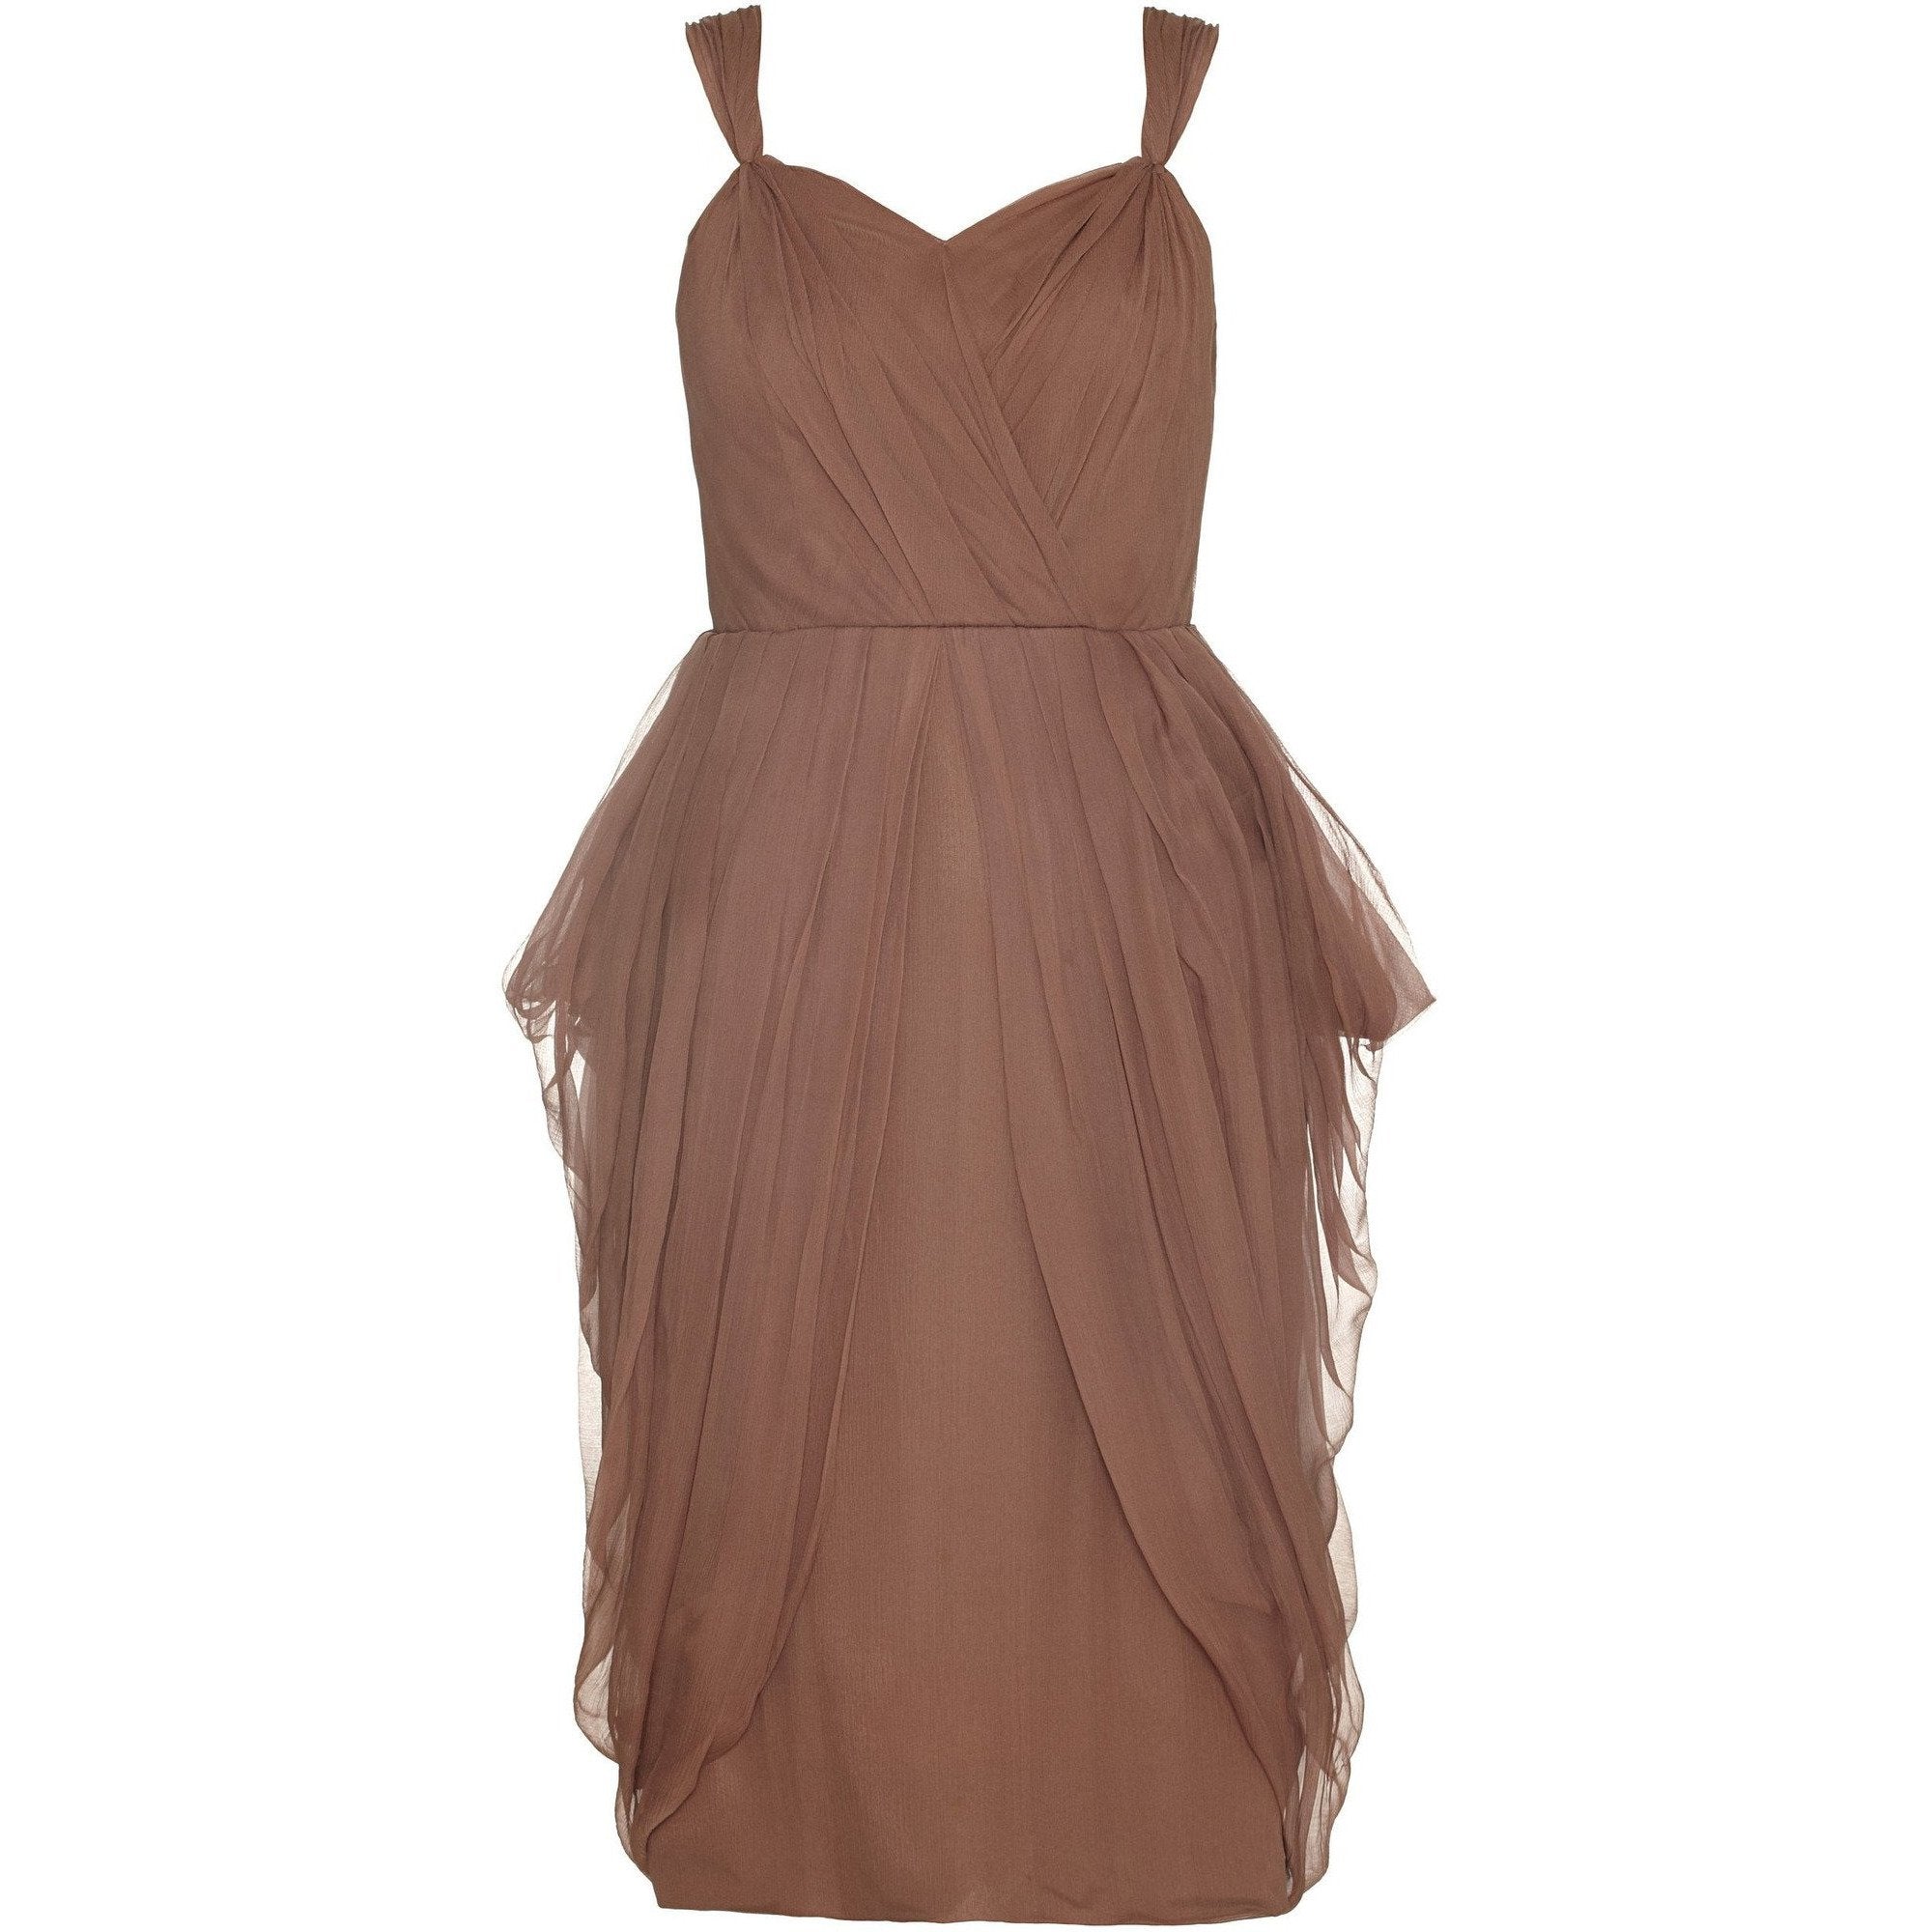 1960s Pale Russet Pleated Silk Chiffon Cocktail Dress